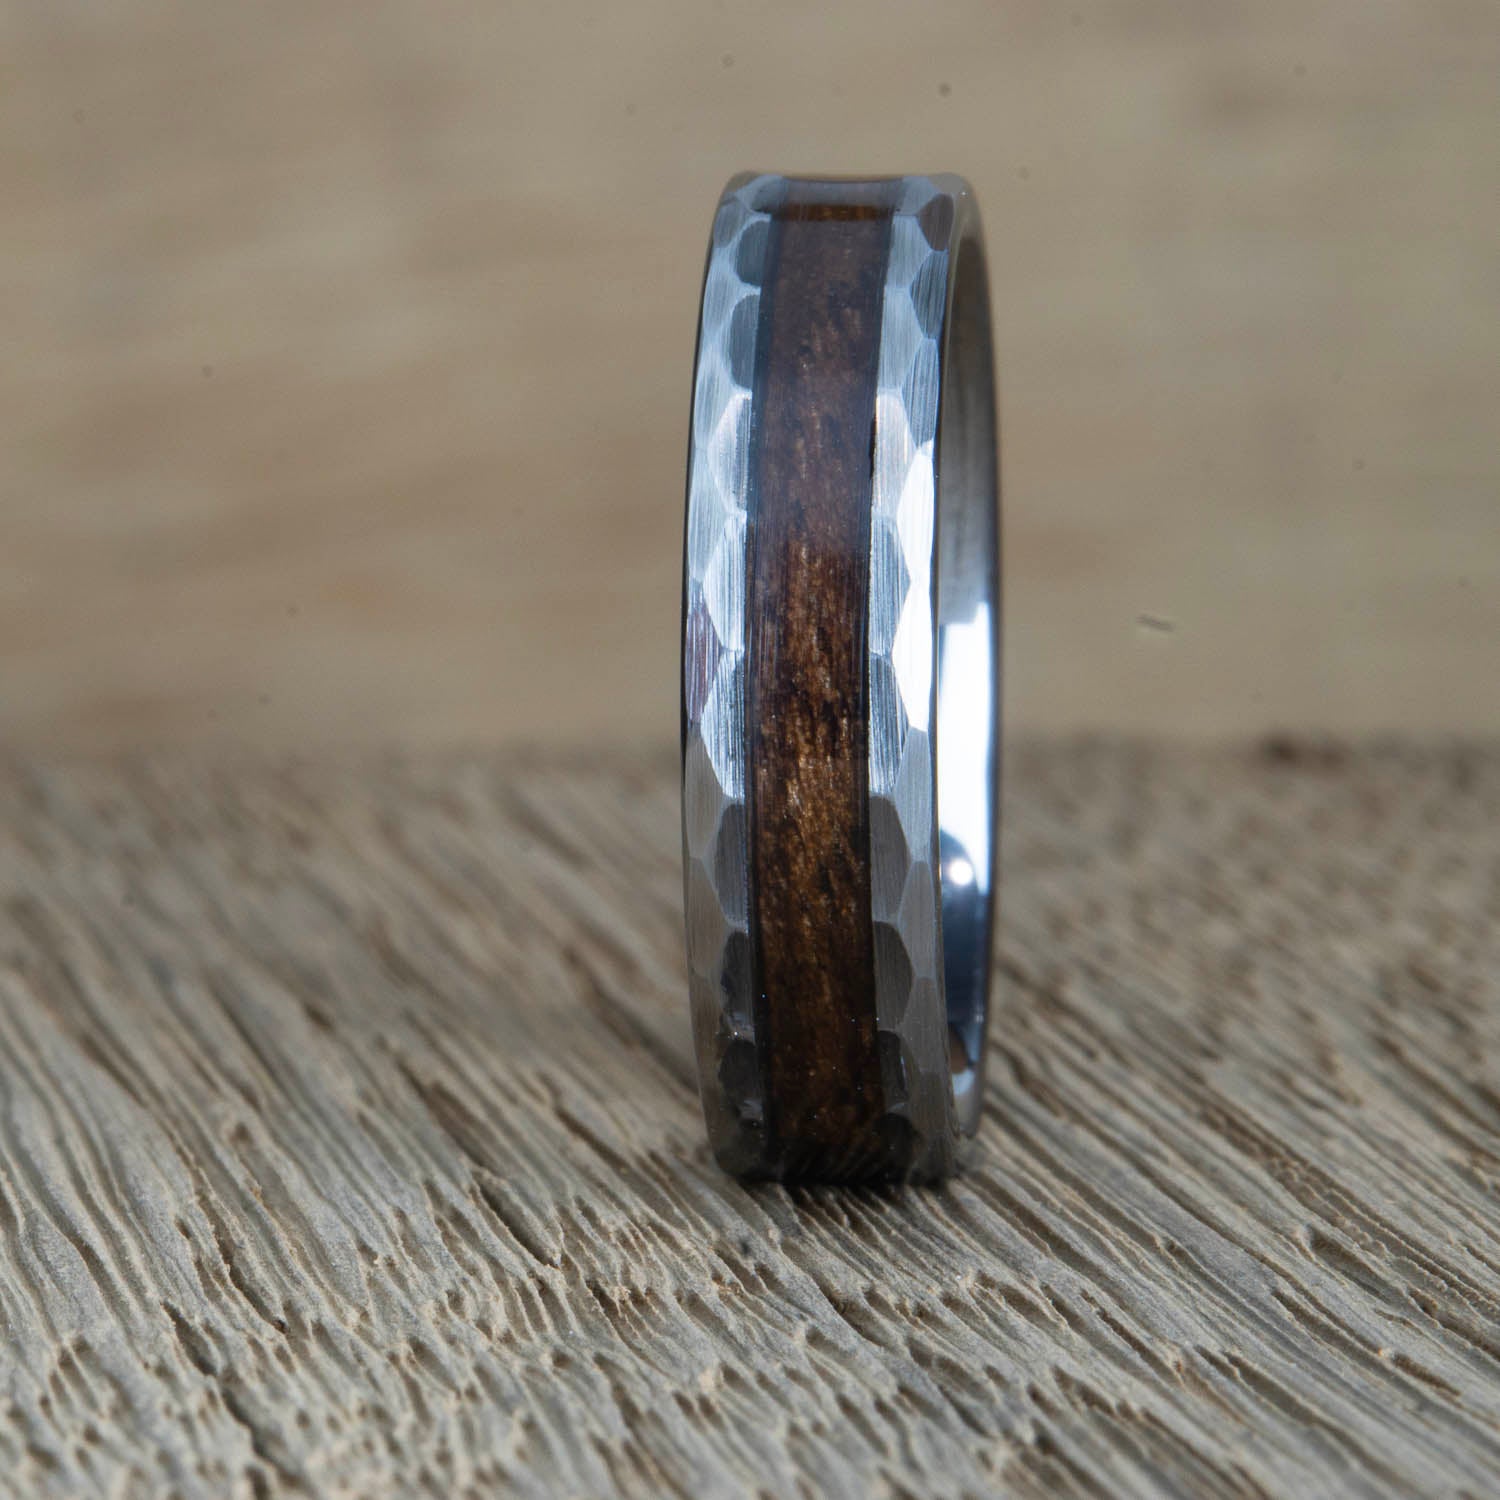 "Deep woods" Hammered tungsten ring with Walnut wood